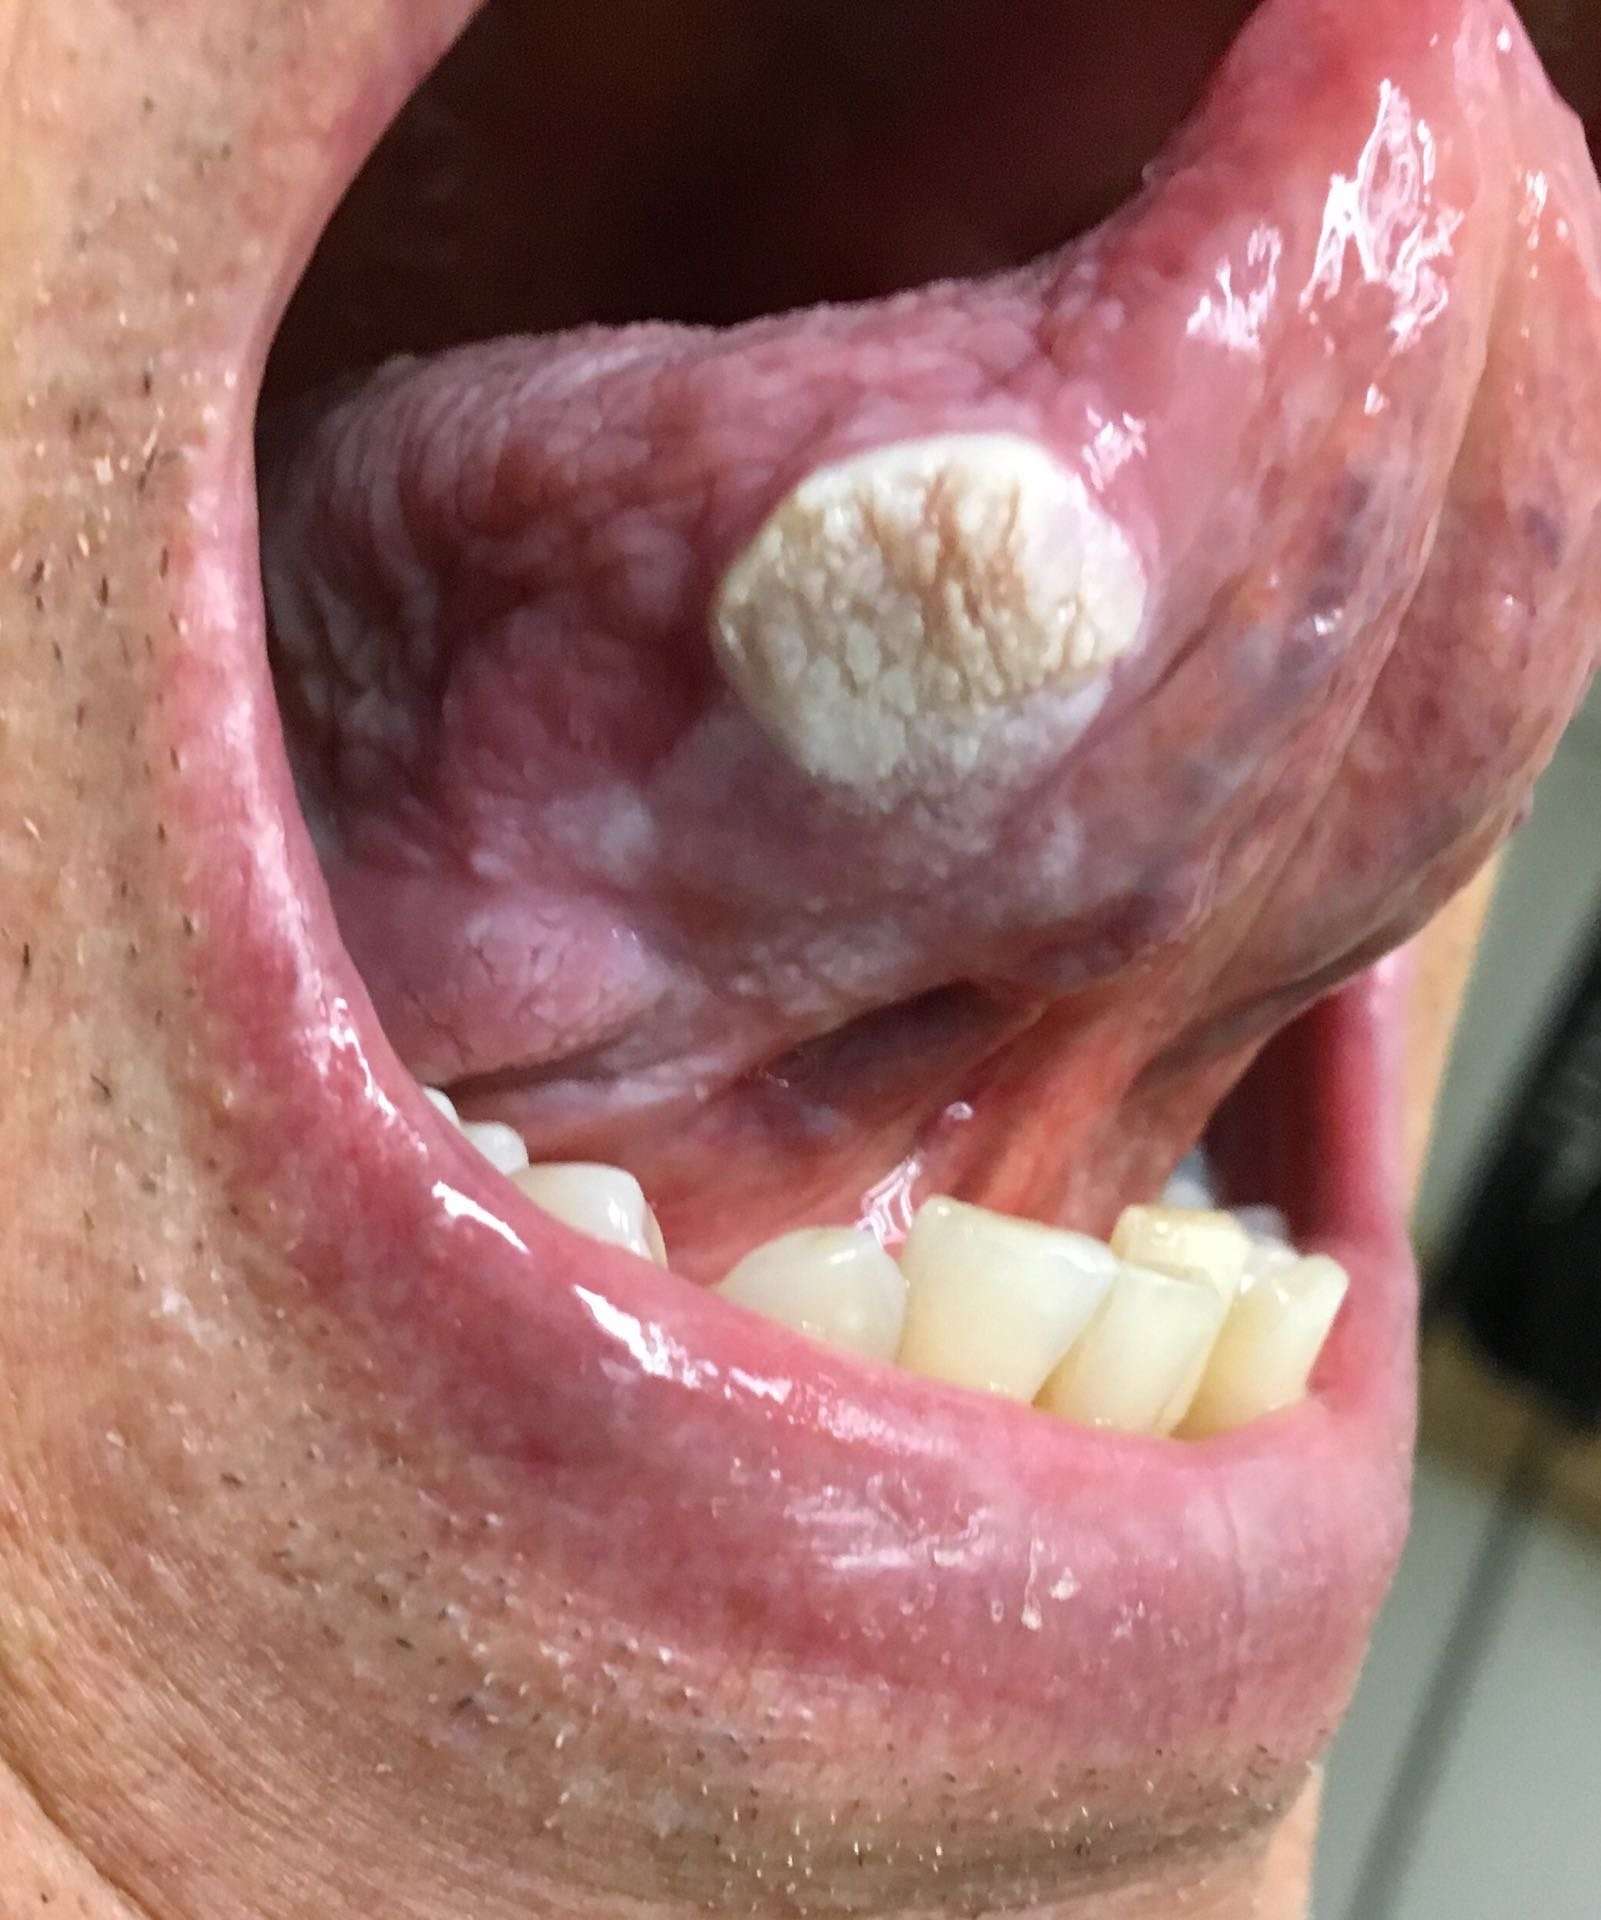 Verrucous squamous cell carcinoma of the tongue